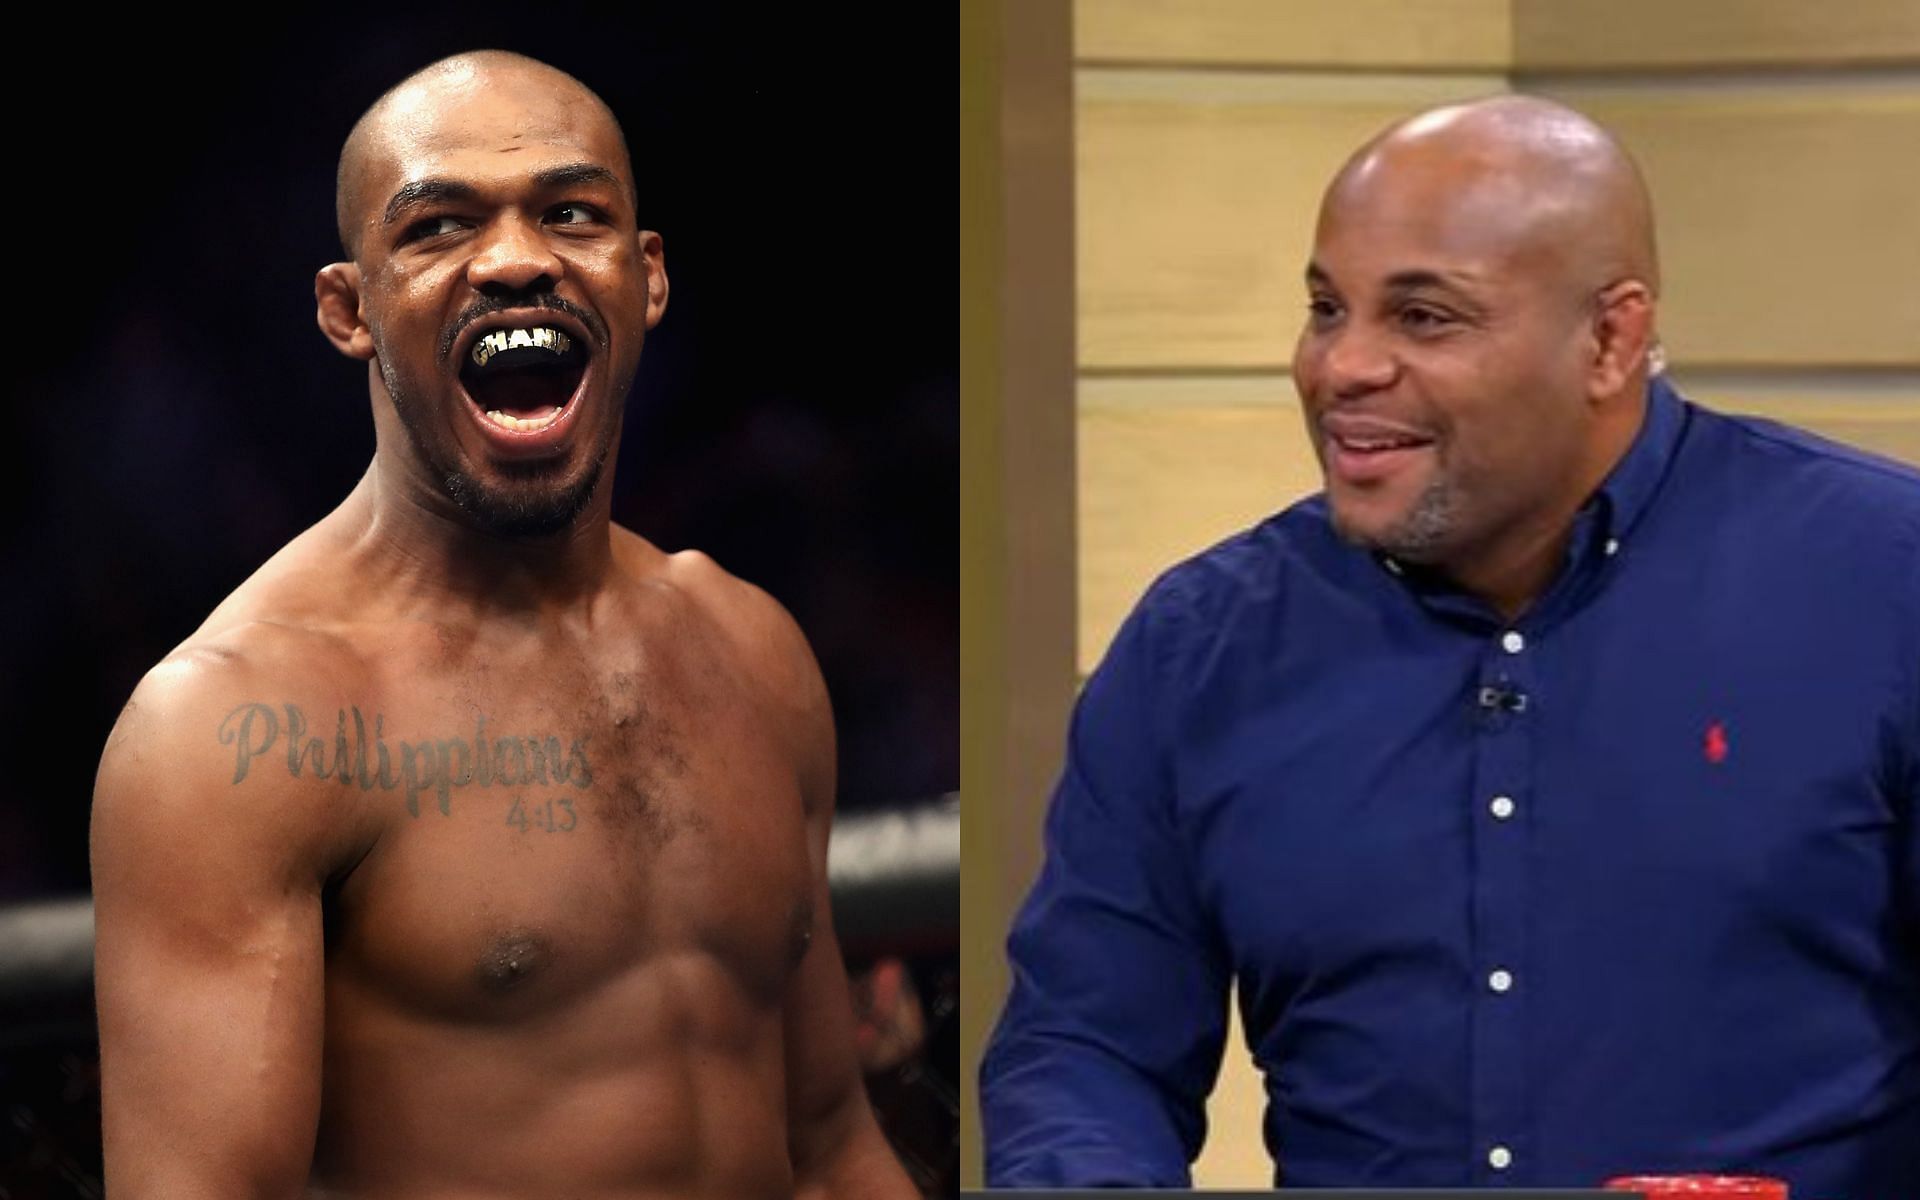 Jon Jones (left) and Daniel Cormier (right) (Image credits Getty Images and @BigMarcel24 on Twitter)